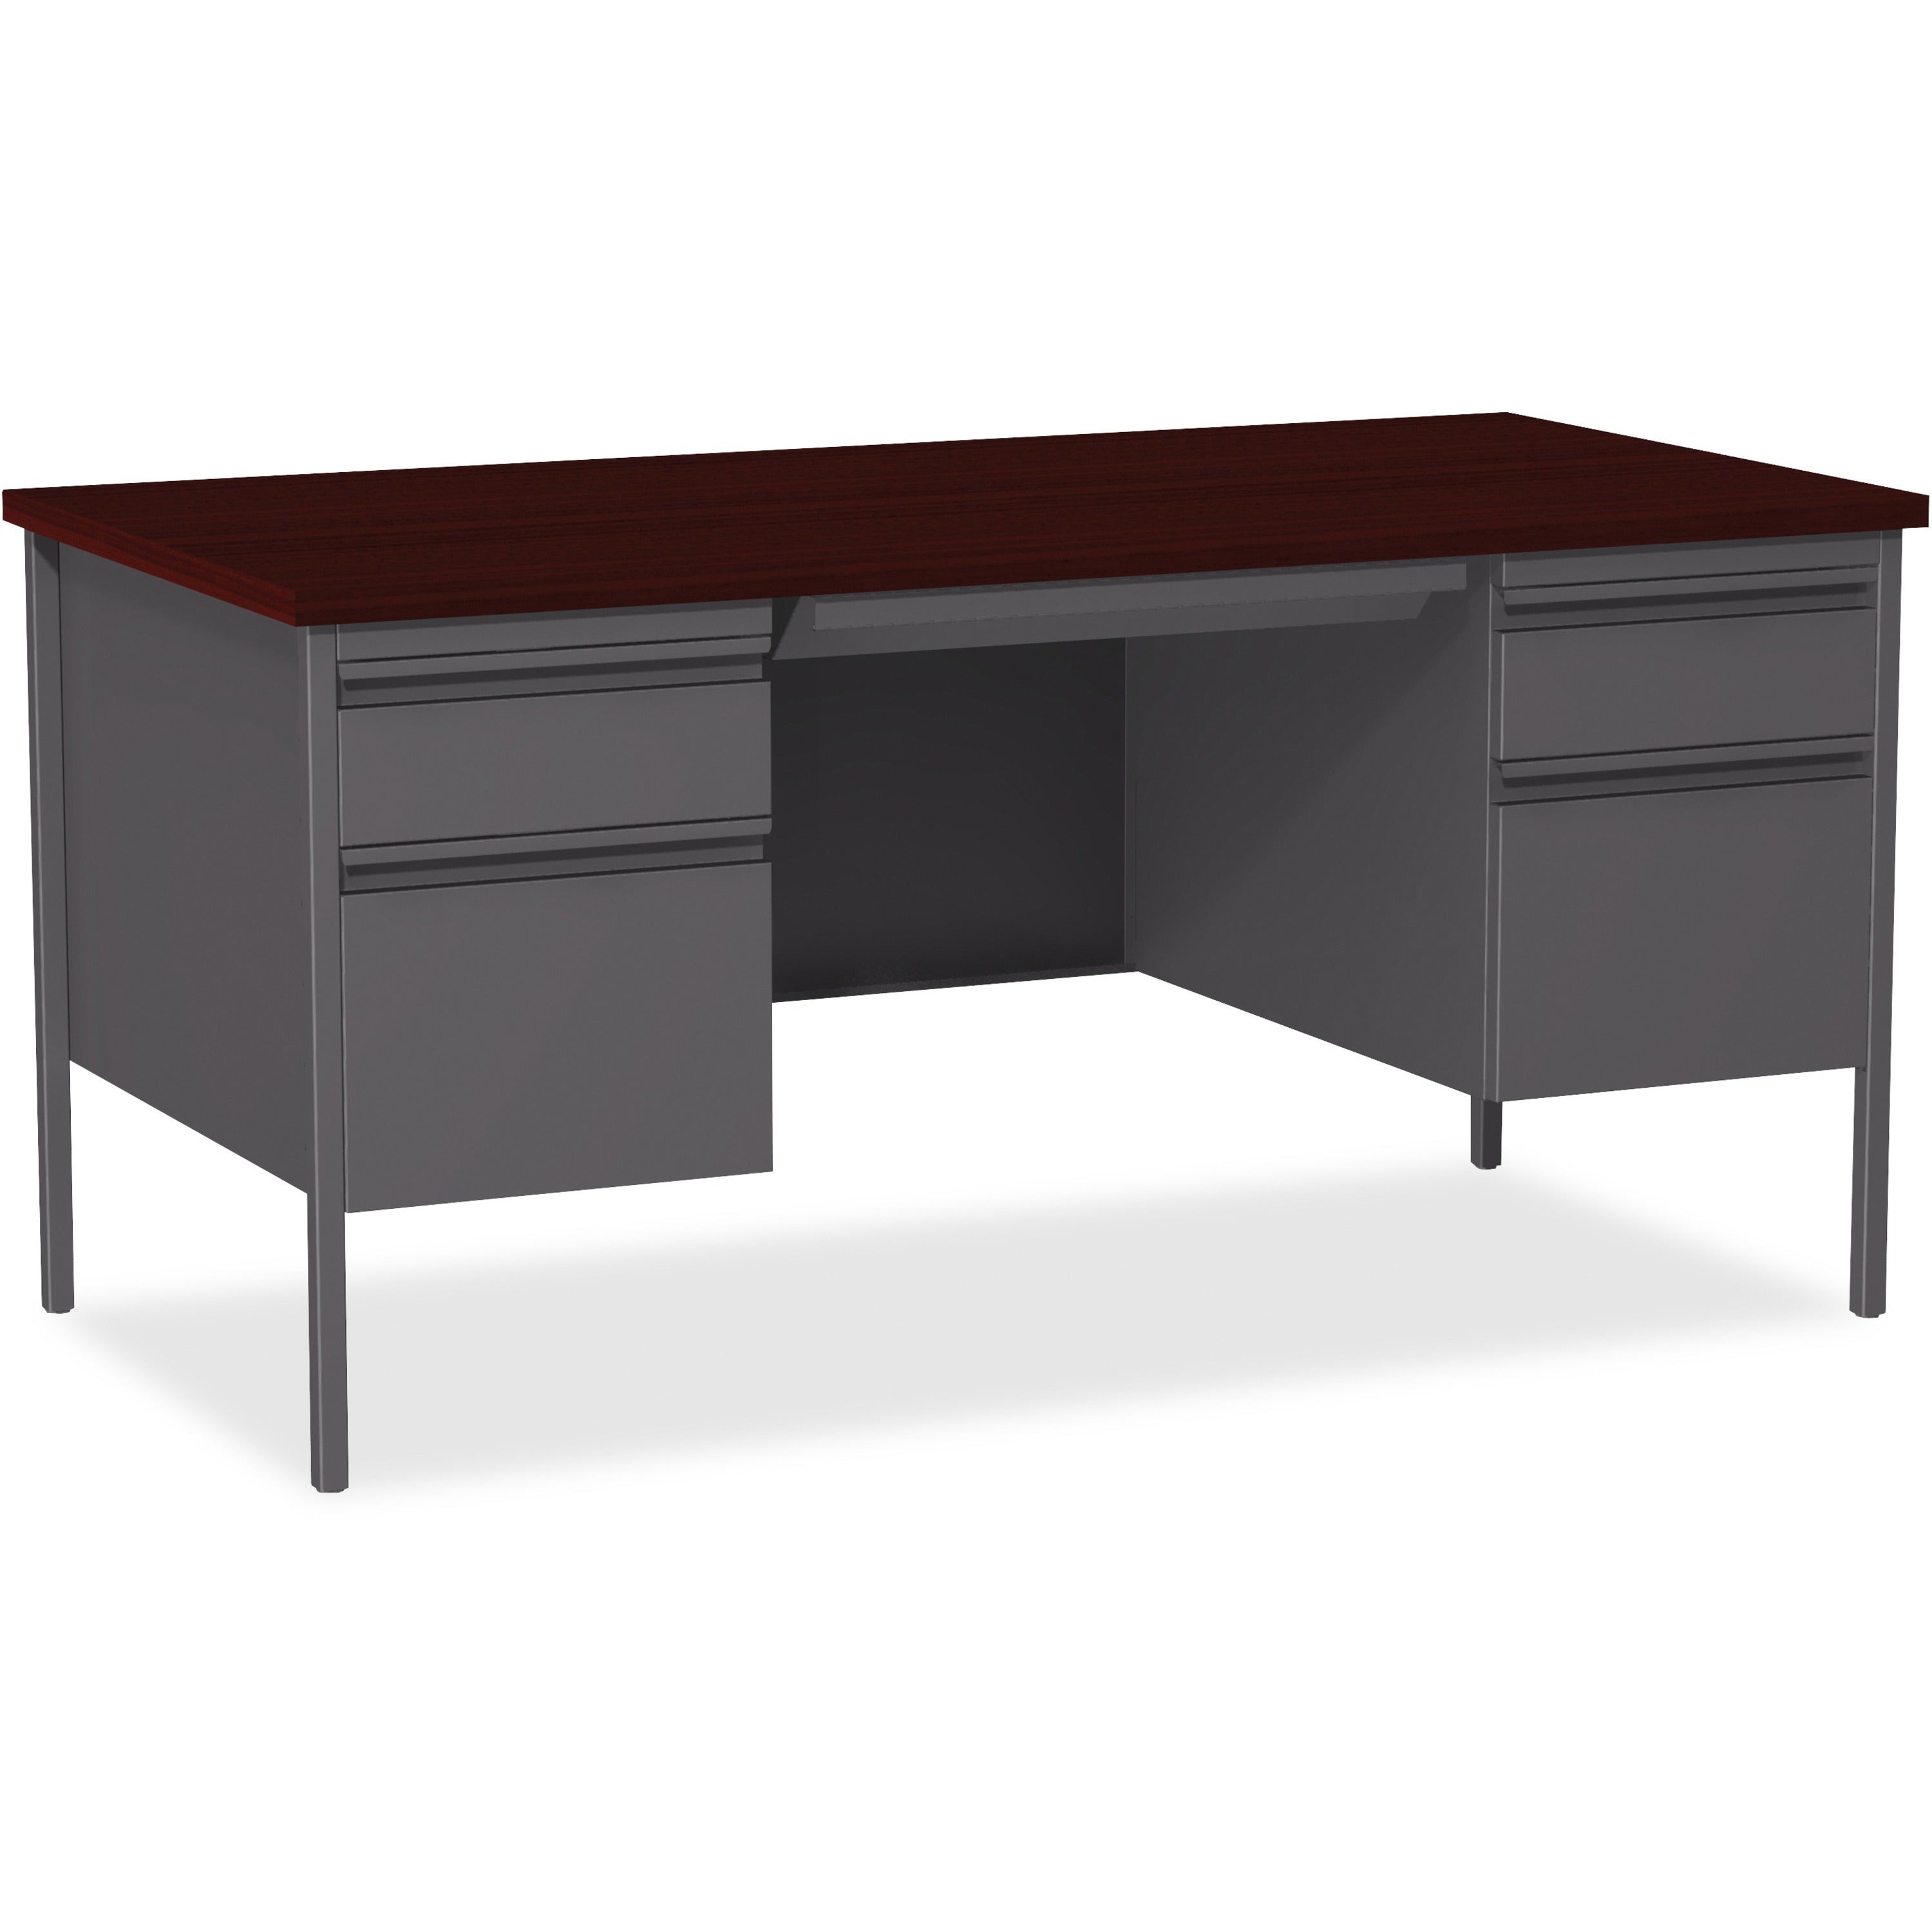 lorell-fortress-series-double-pedestal-desk-for-table-toprectangle-top-x-60-table-top-width-x-30-table-top-depth-x-112-table-top-thickness-2950-height-assembly-required-laminated-mahogany-steel-1-each_llr60928 - 1